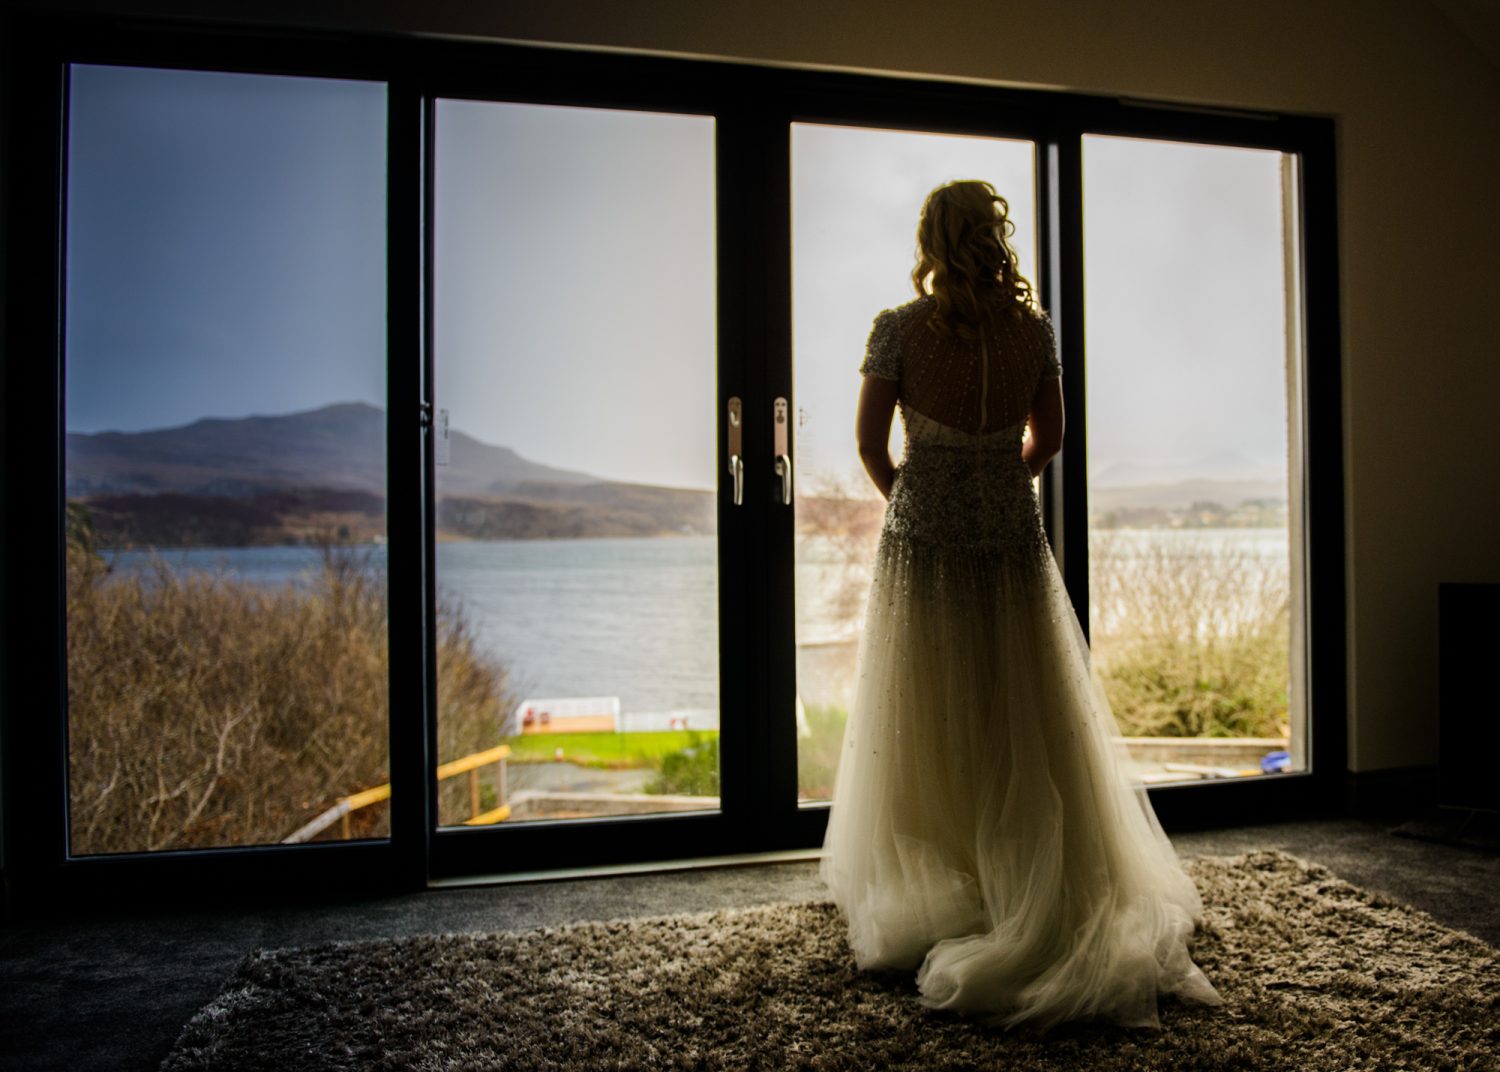 Bride stands with wedding dress on looking out of patio windows